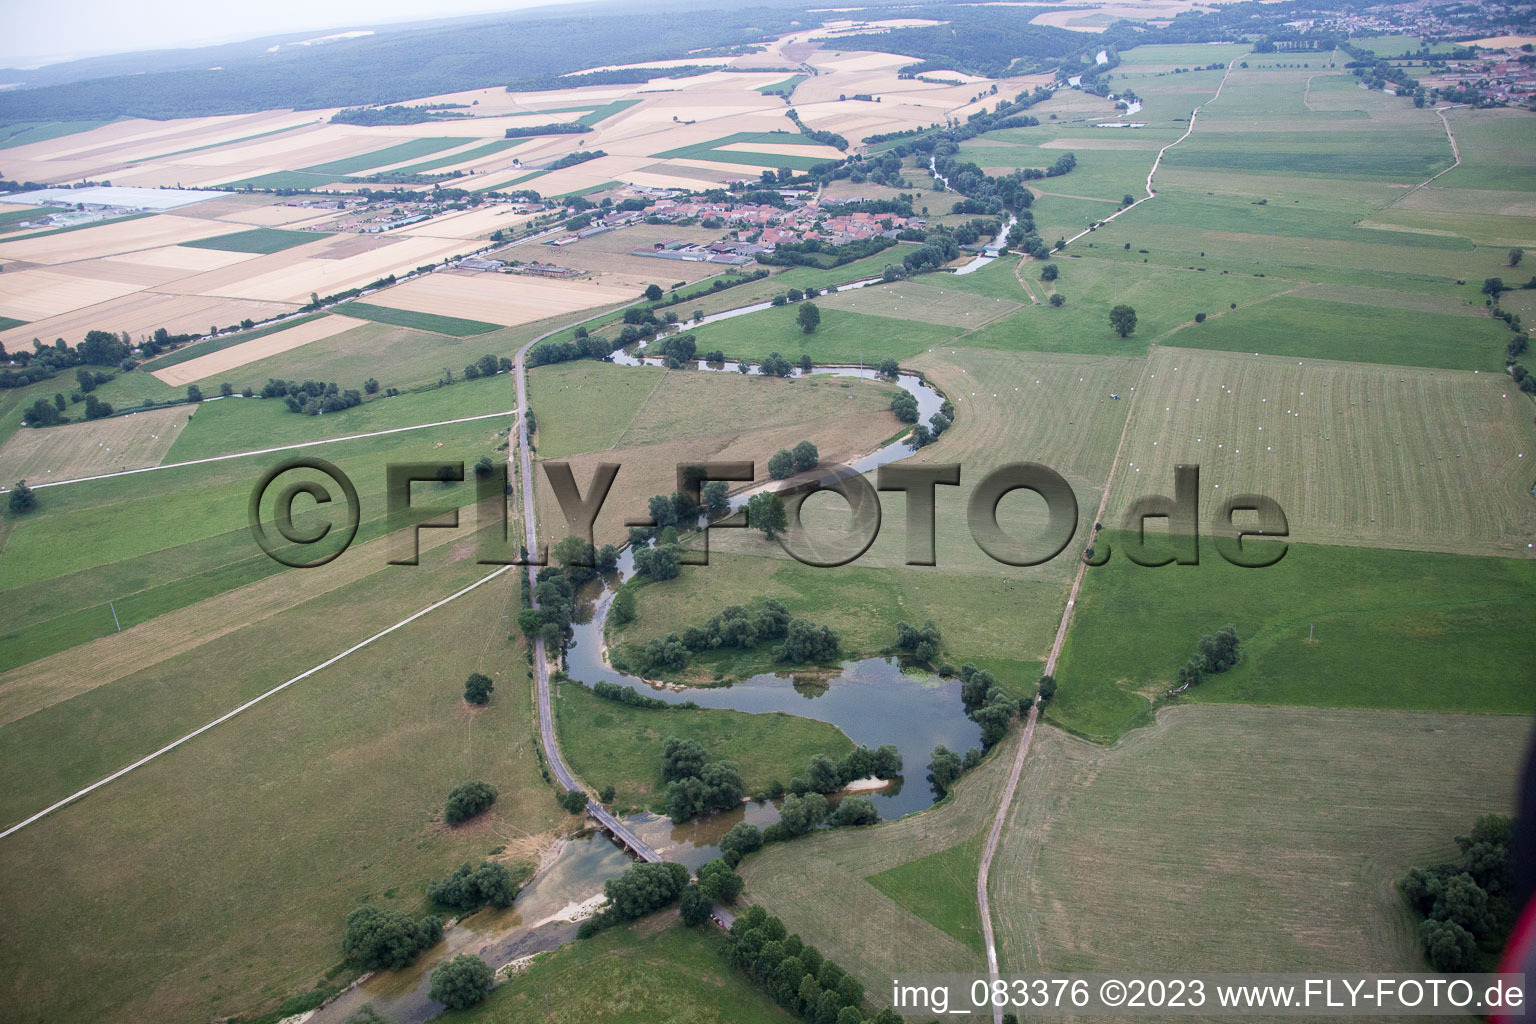 Aerial photograpy of Dompcevrin in the state Meuse, France